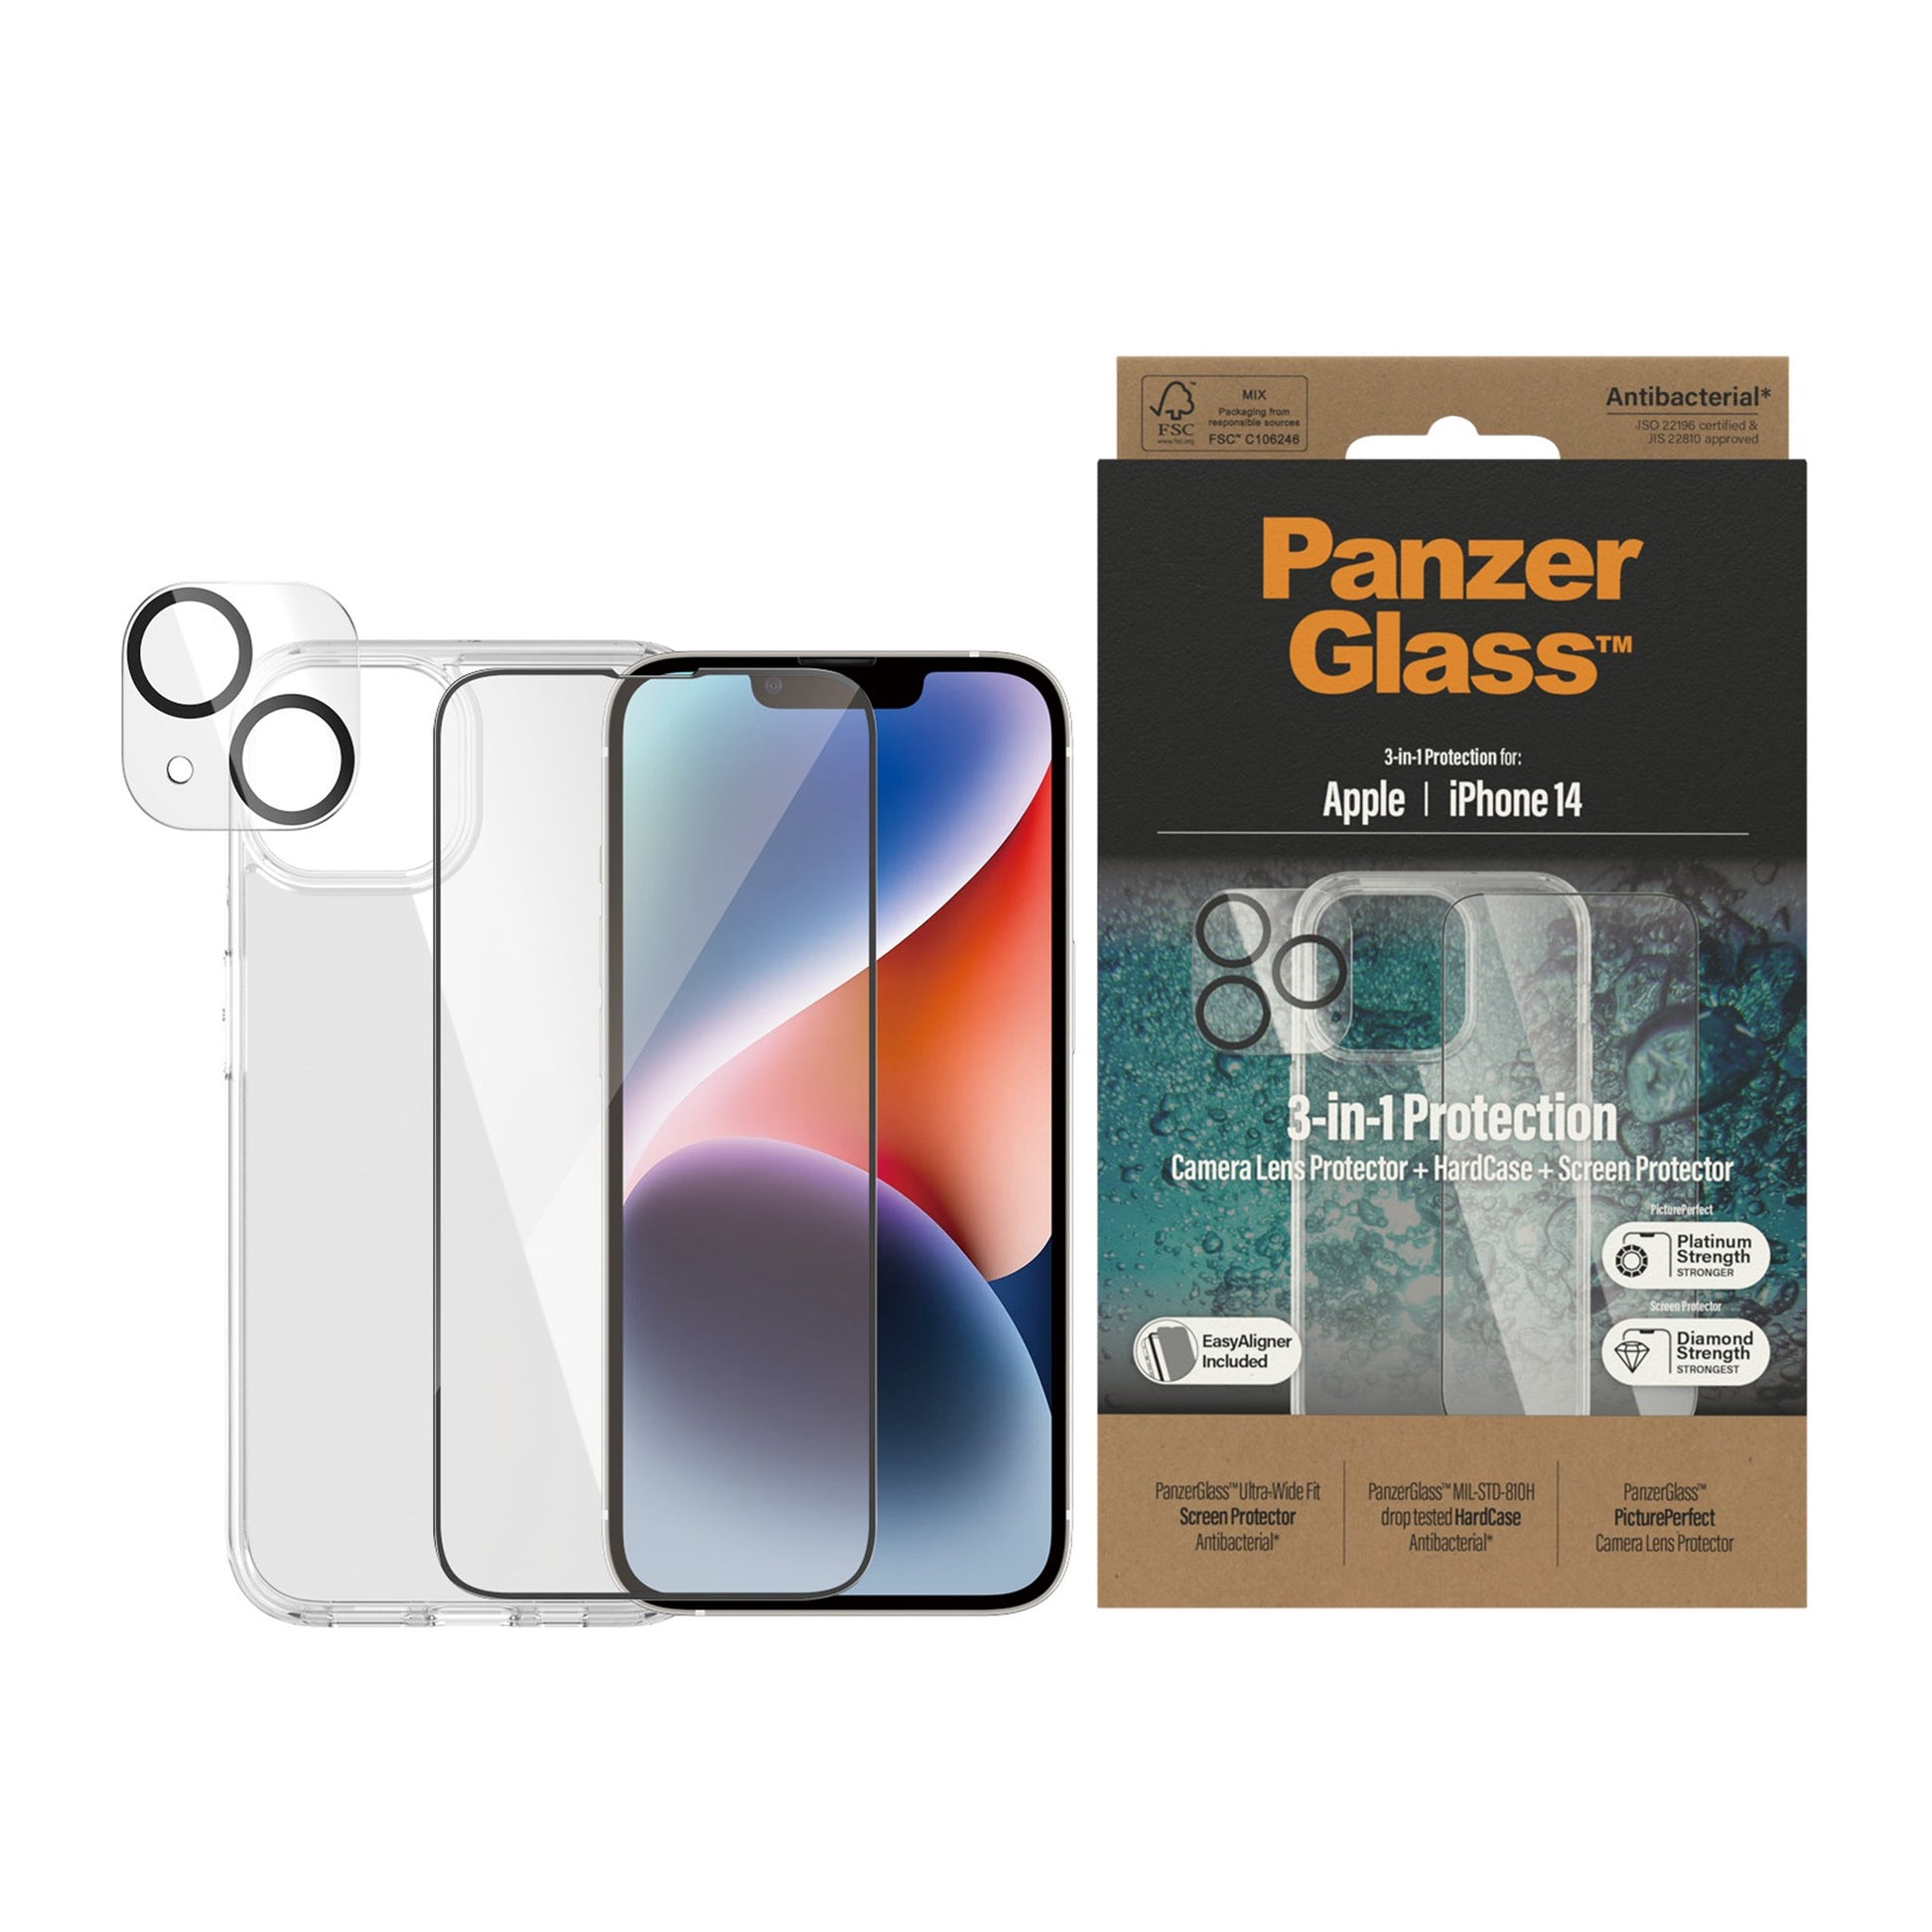 PanzerGlass™ 3-in-1 Protection Pack Apple iPhone 14 2